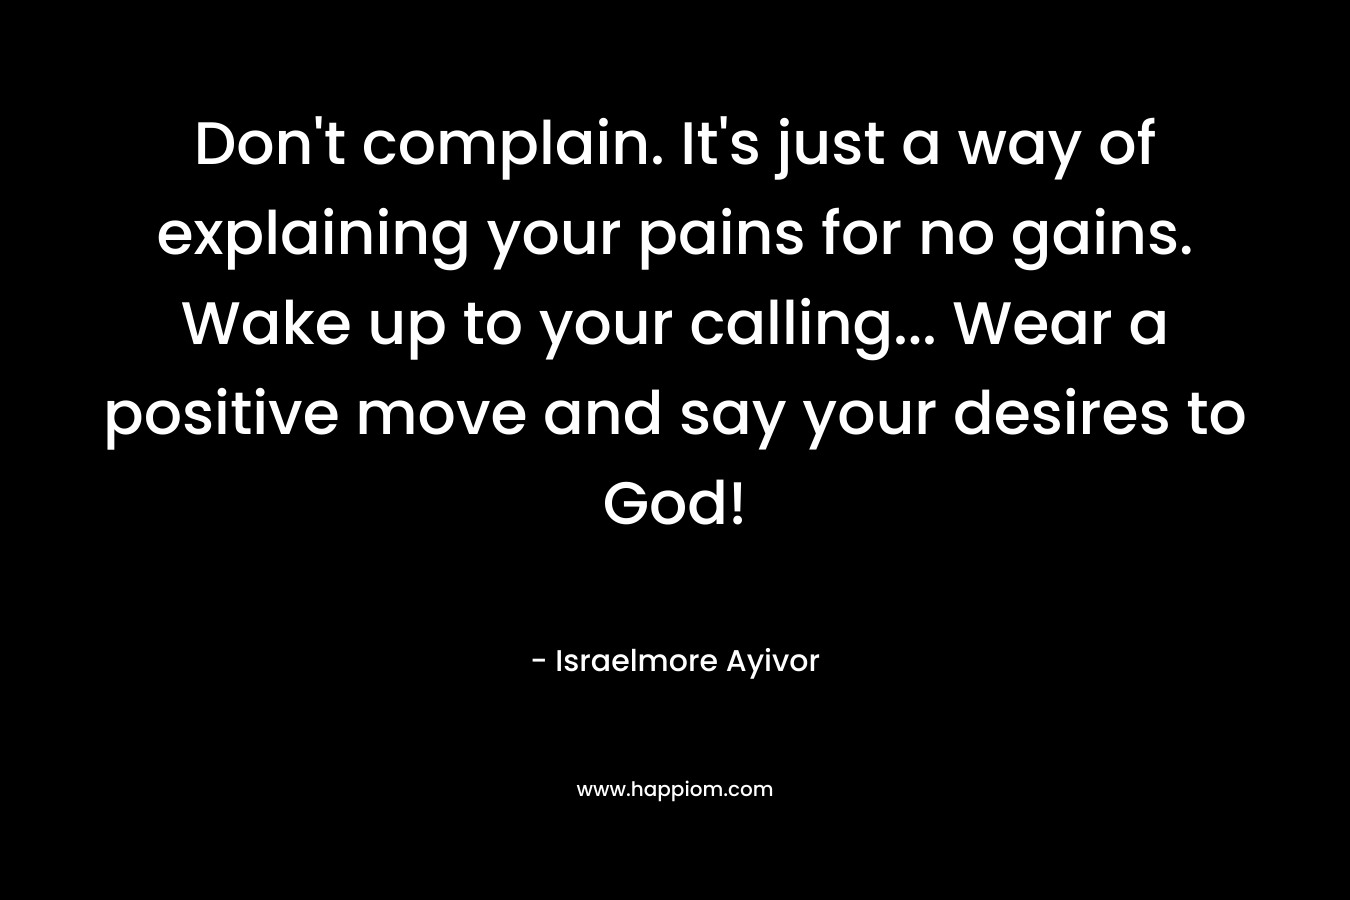 Don’t complain. It’s just a way of explaining your pains for no gains. Wake up to your calling… Wear a positive move and say your desires to God! – Israelmore Ayivor